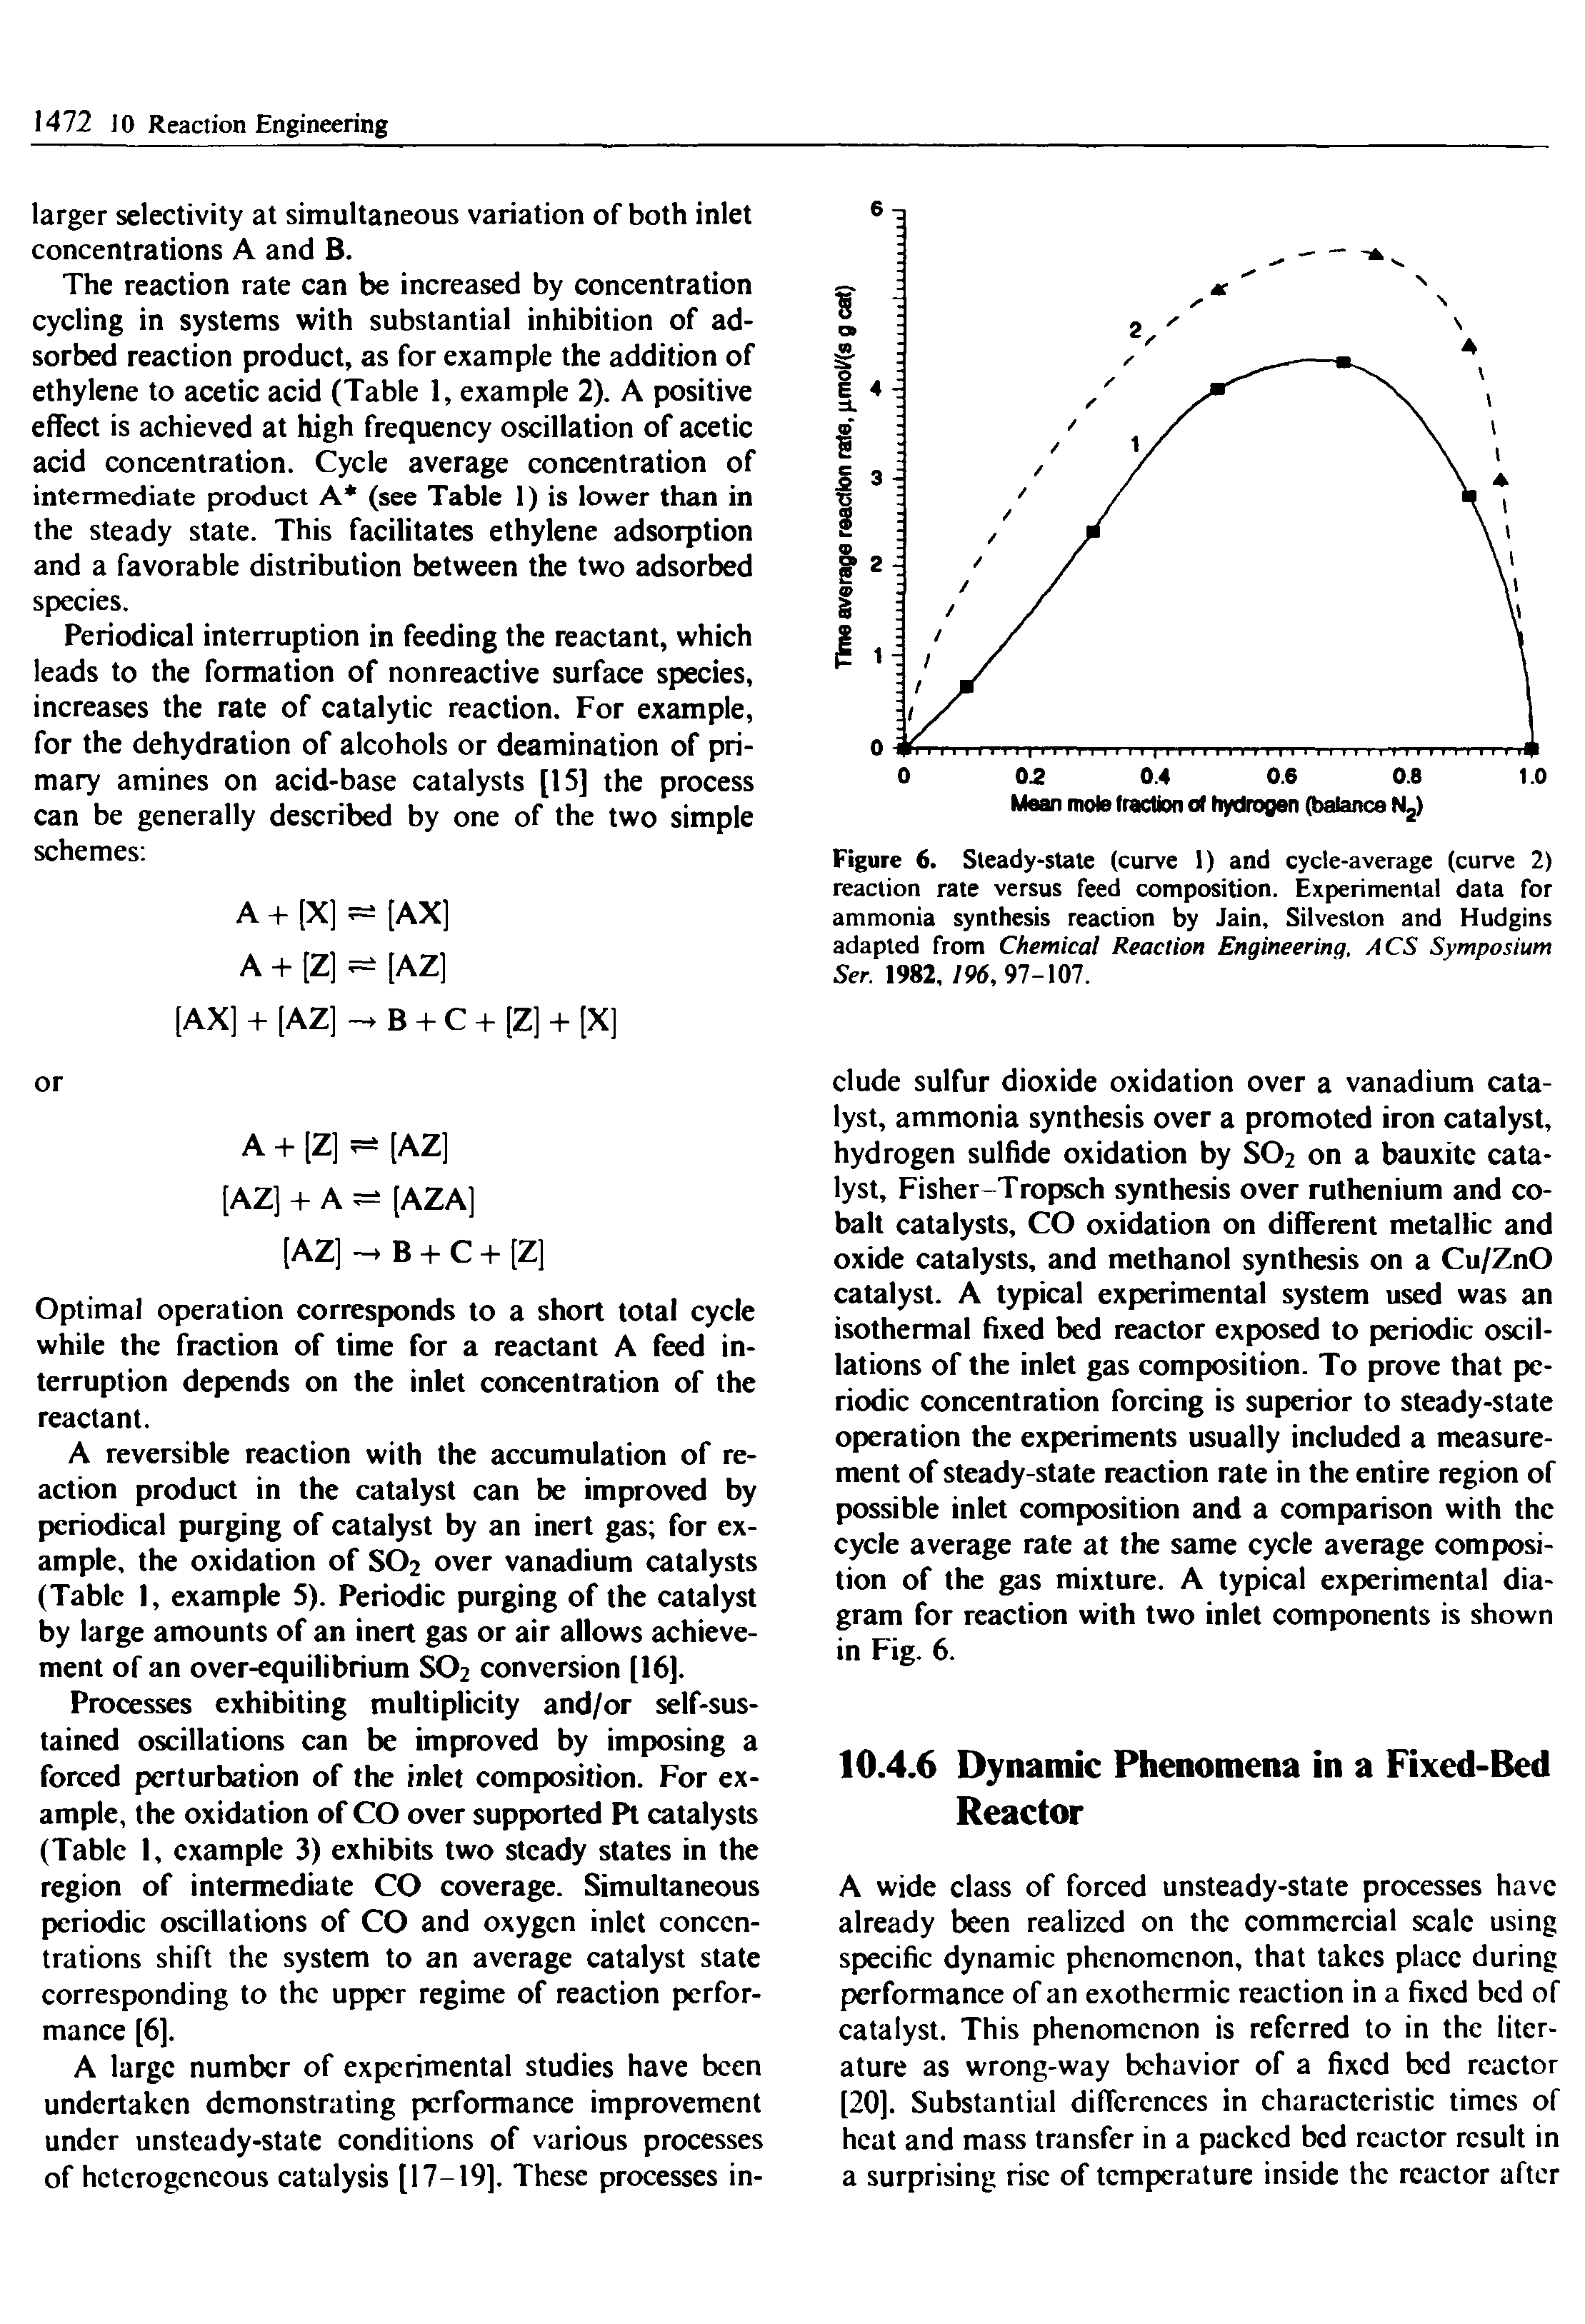 Figure 6. Steady-state (curve 1) and cycle-average (curve 2) reaction rate versus feed composition. Experimental data for ammonia synthesis reaction by Jain, Silveston and Hudgins adapted from Chemical Reaction Engineering, ACS Symposium Ser, 1982, 196, 97-107.